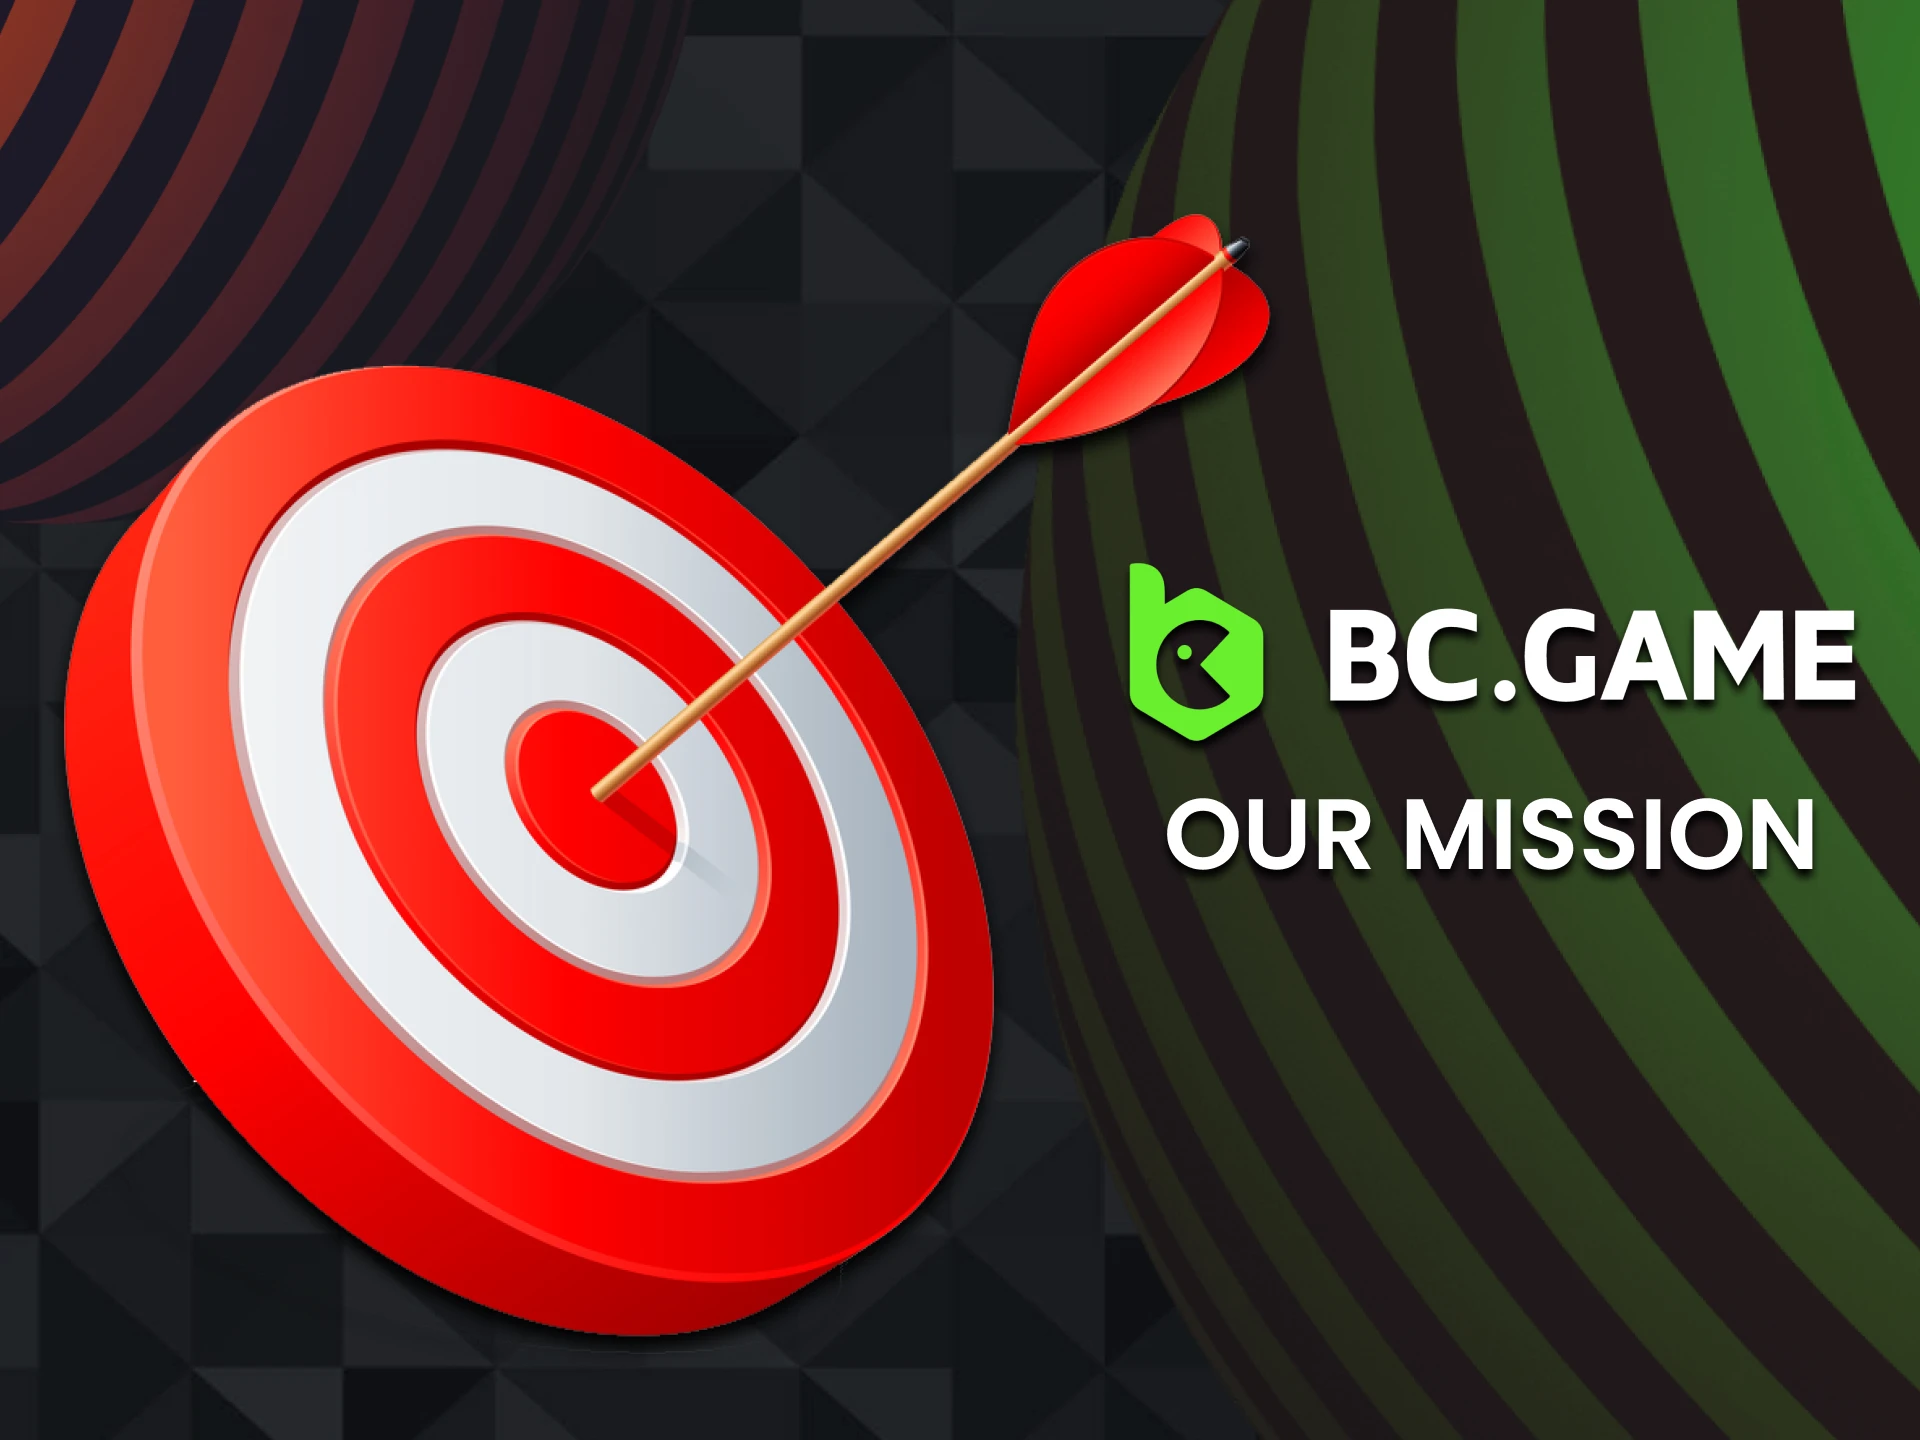 Find out what the BCGame team's goal is.